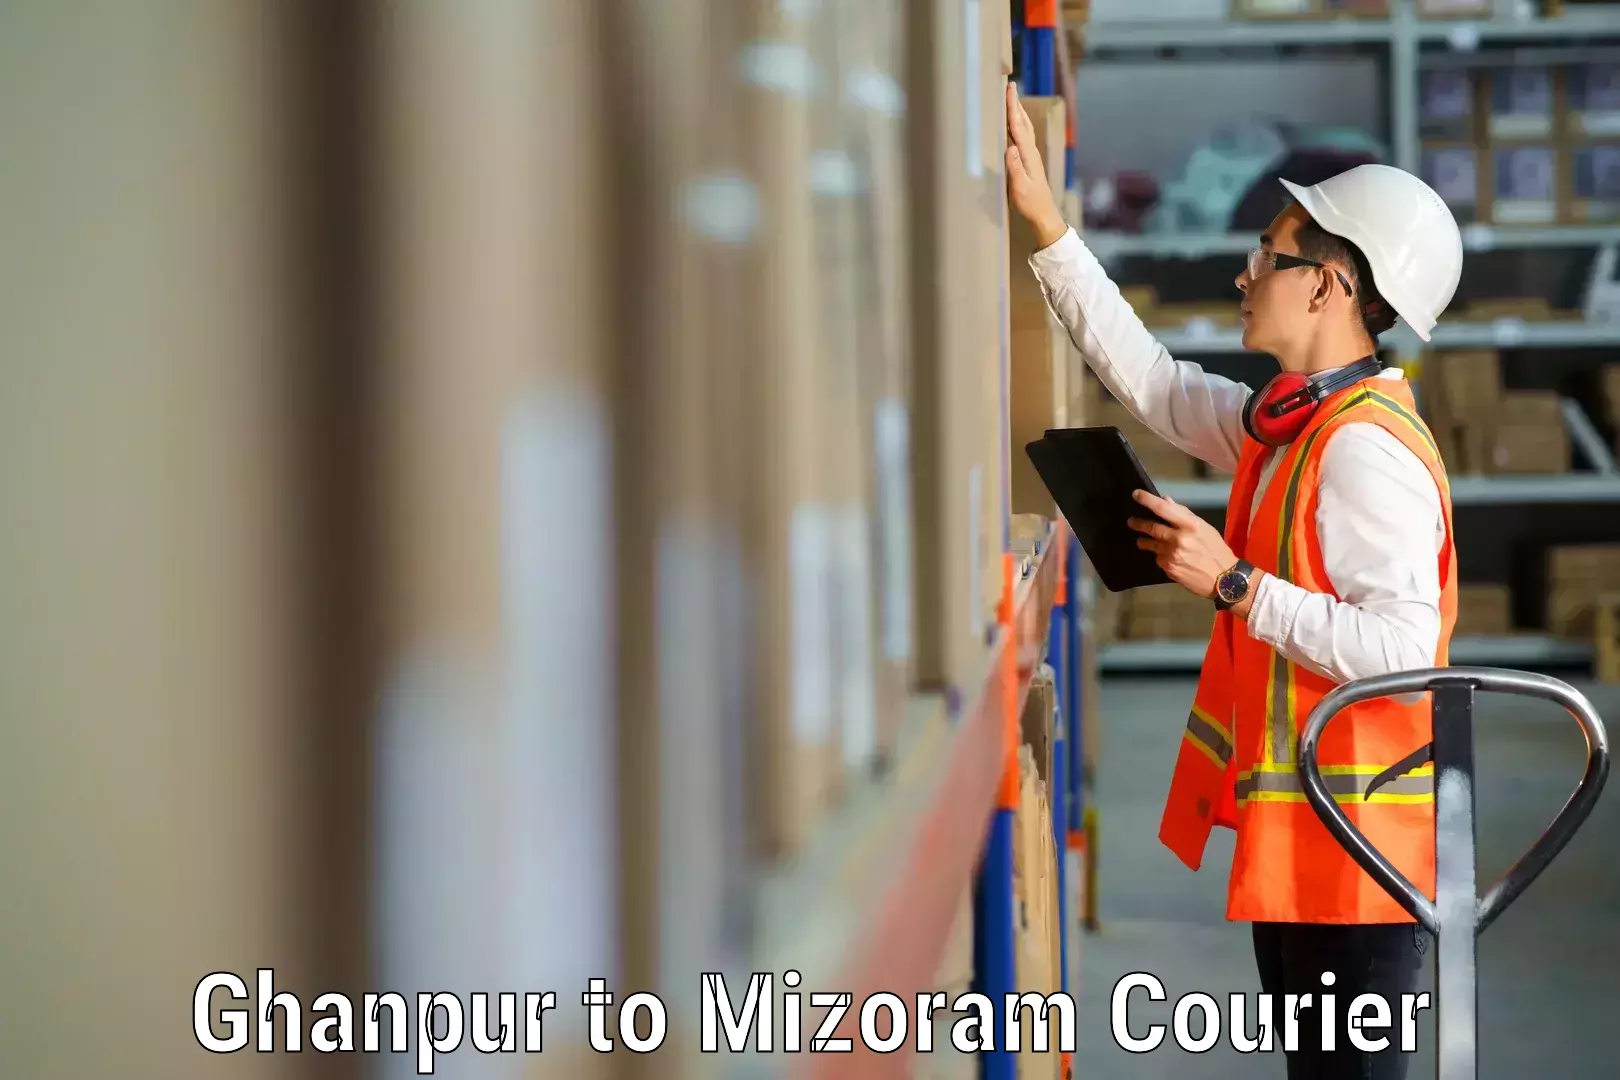 Furniture delivery service Ghanpur to Mizoram